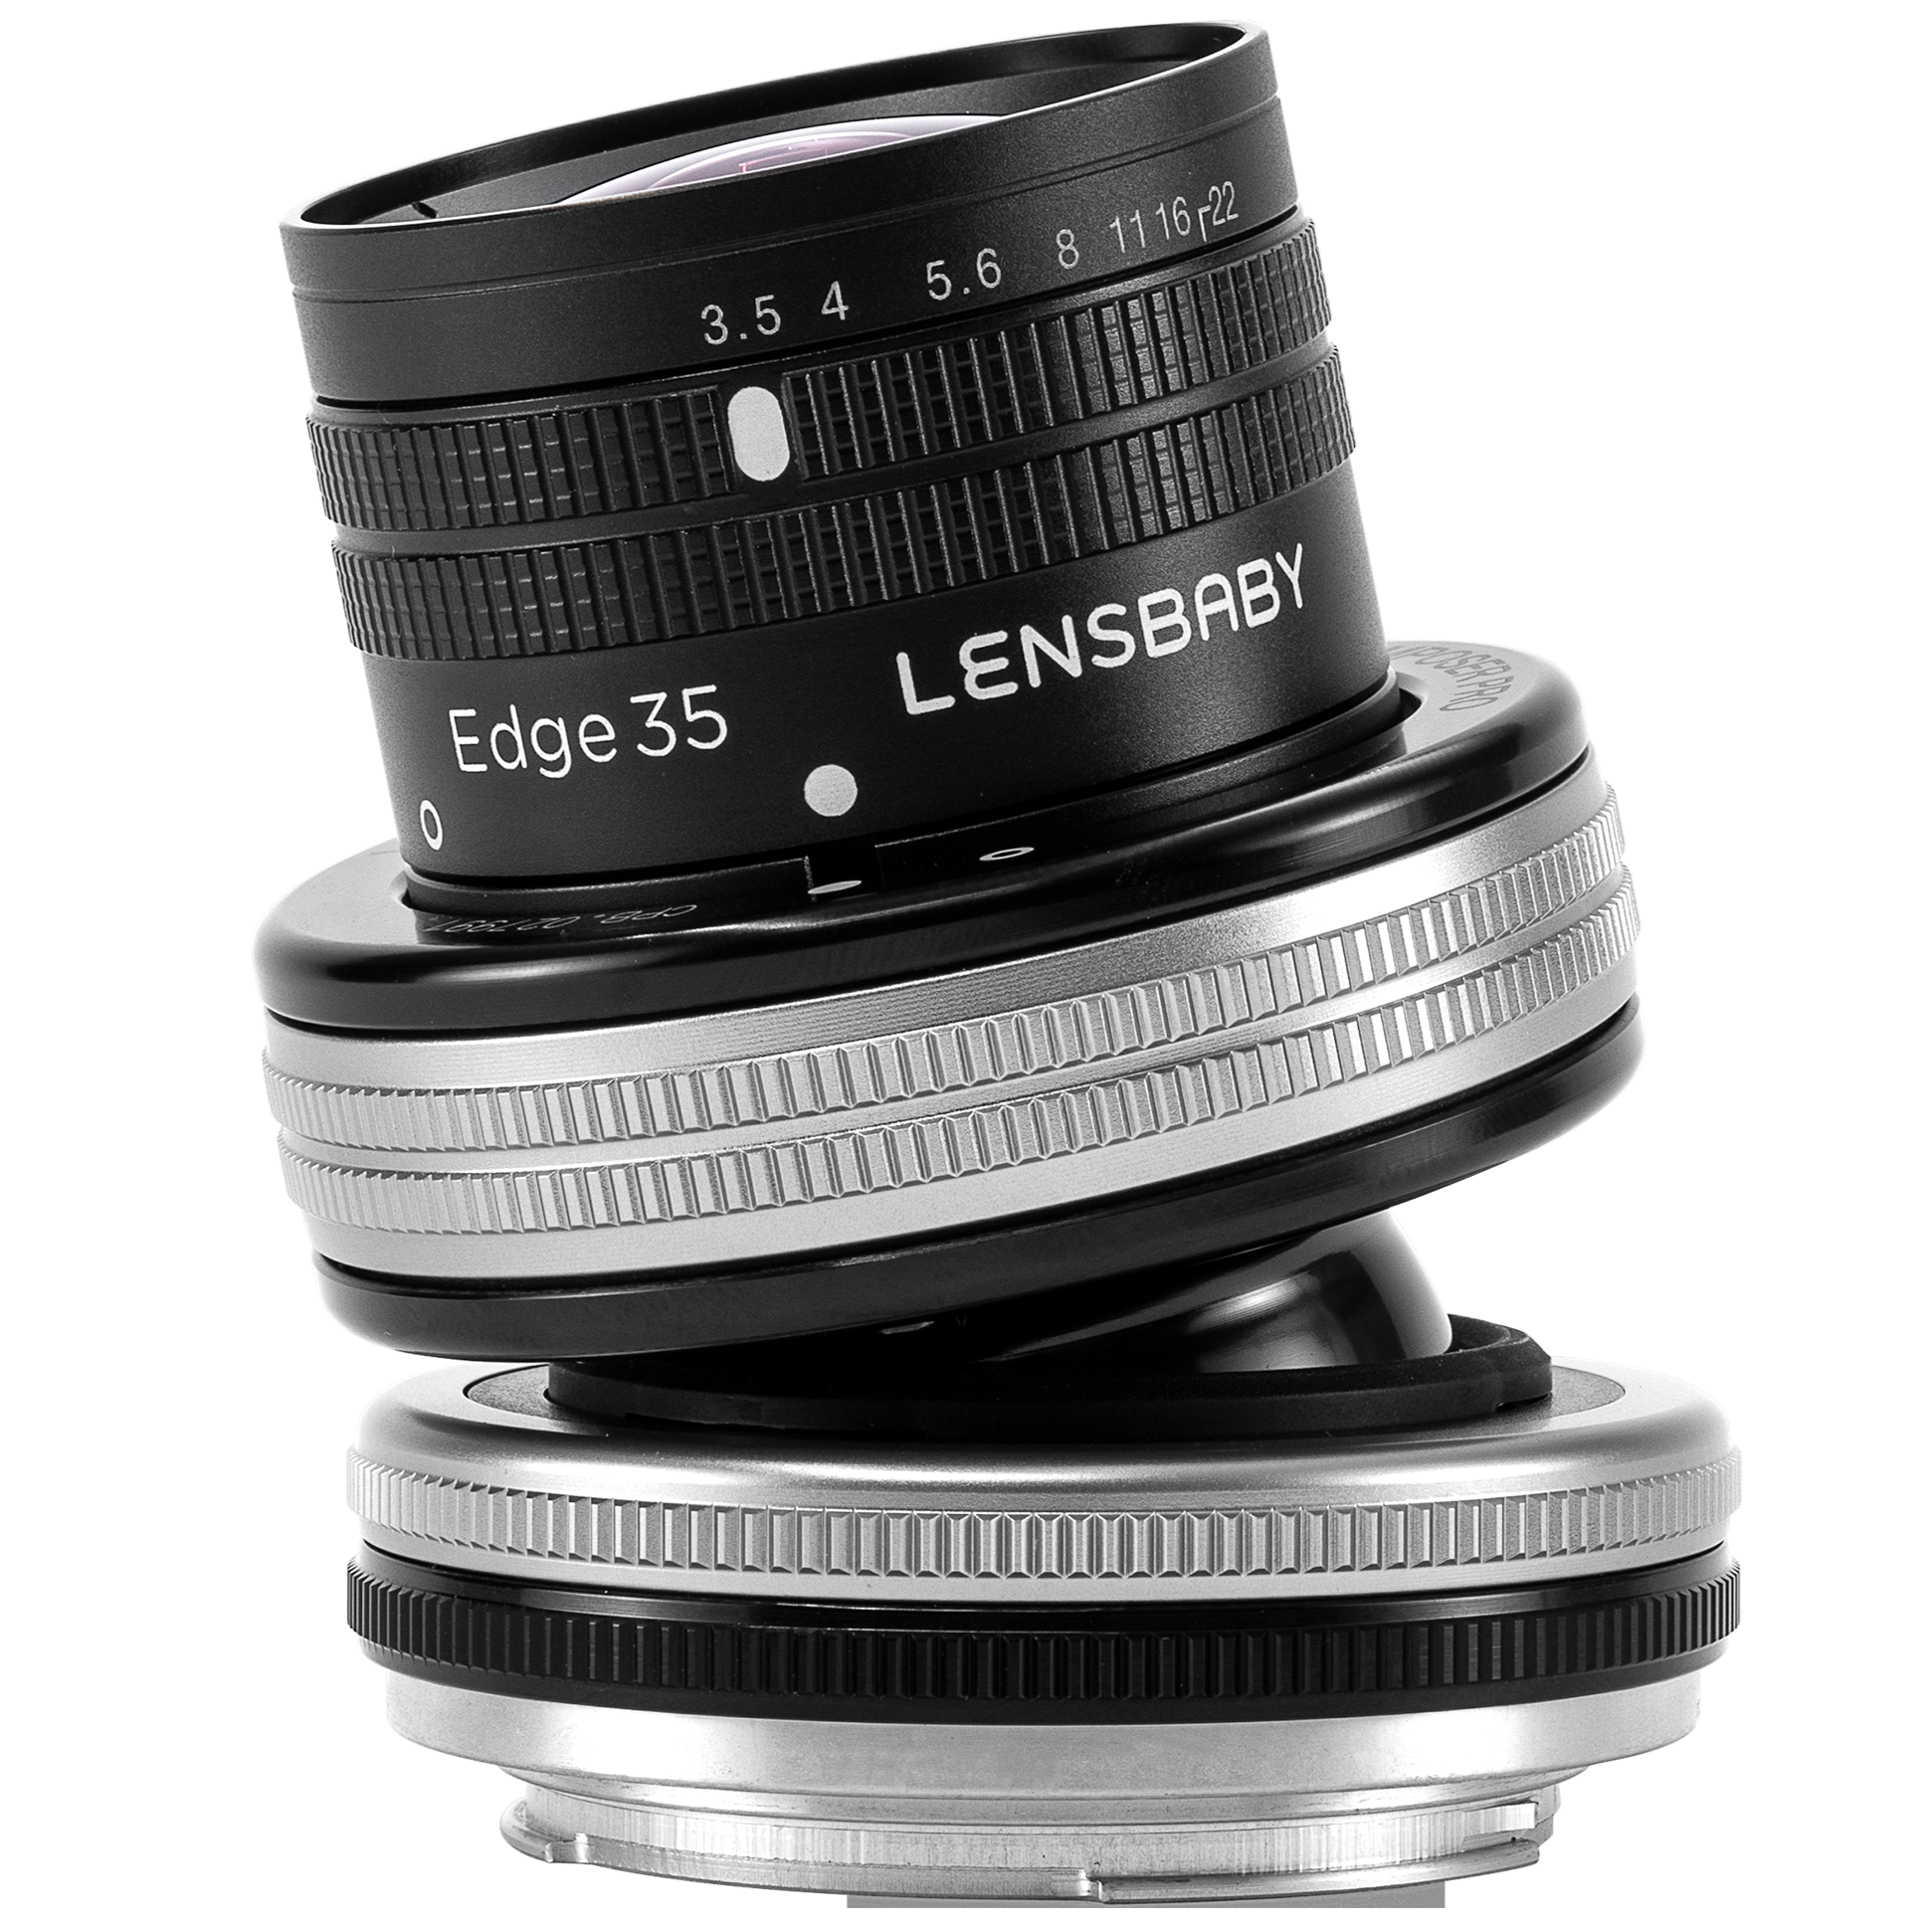 Composer Pro II With Edge 35 Optic Camera Lens | Lensbaby